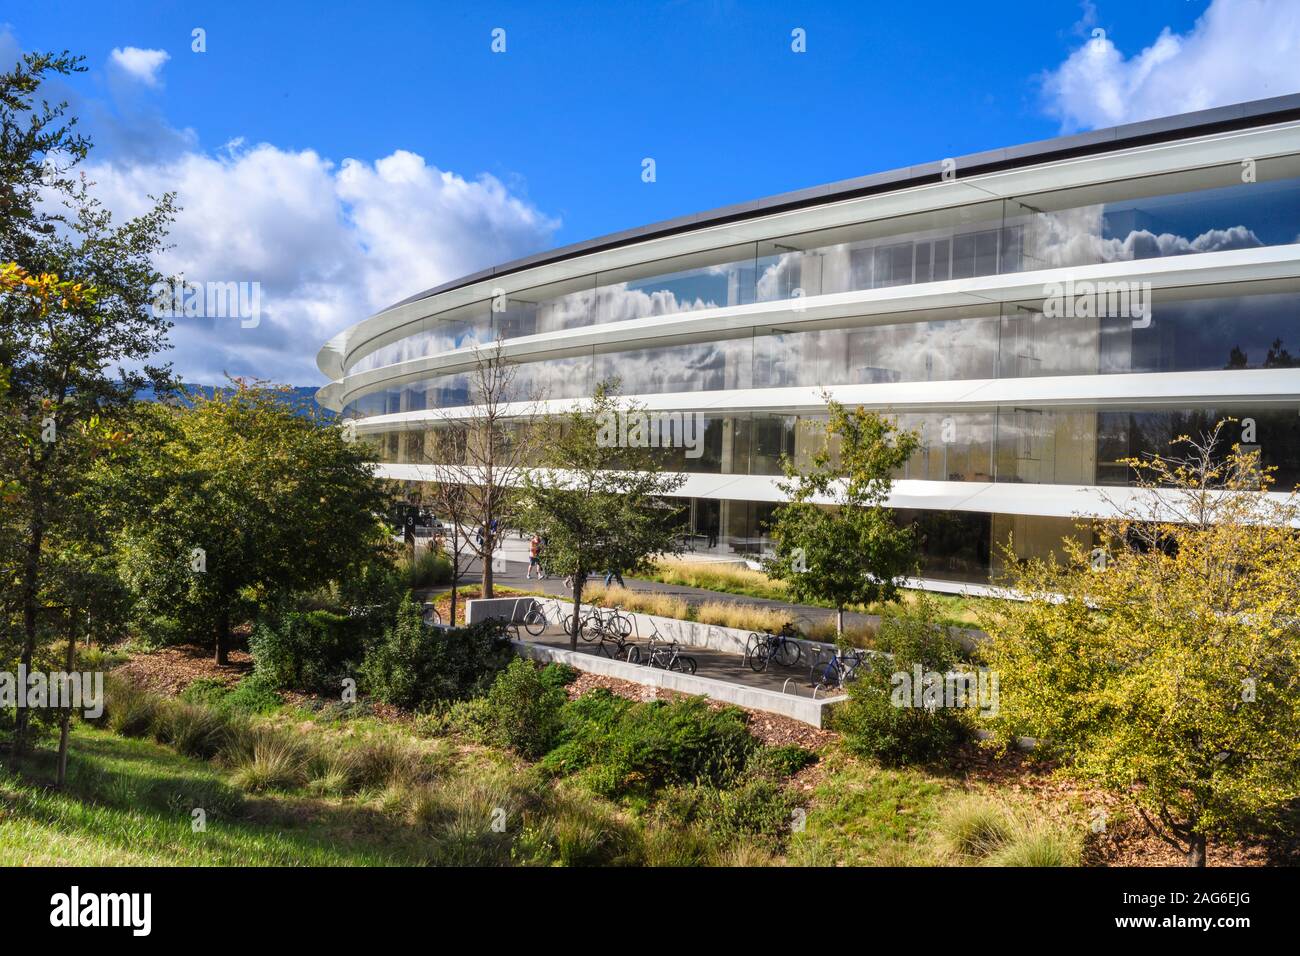 Cupertino CA USA December 14, 2019: Closeup of Apple headquarters offices building exterior with employee bicycles and drought tolerant native landsca Stock Photo